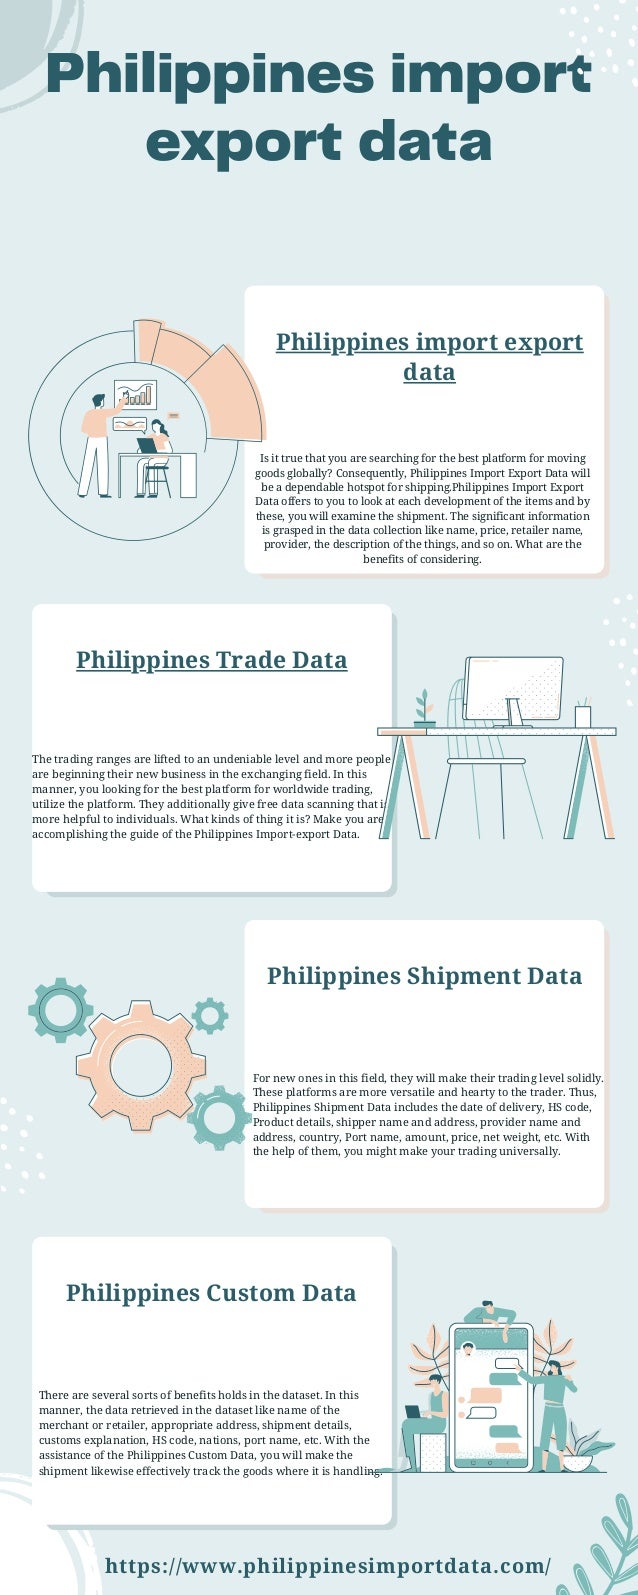 Philippines import
export data
Philippines import export
data
Is it true that you are searching for the best platform for moving
goods globally? Consequently, Philippines Import Export Data will
be a dependable hotspot for shipping.Philippines Import Export
Data offers to you to look at each development of the items and by
these, you will examine the shipment. The significant information
is grasped in the data collection like name, price, retailer name,
provider, the description of the things, and so on. What are the
benefits of considering.


Philippines Trade Data
The trading ranges are lifted to an undeniable level and more people
are beginning their new business in the exchanging field. In this
manner, you looking for the best platform for worldwide trading,
utilize the platform. They additionally give free data scanning that is
more helpful to individuals. What kinds of thing it is? Make you are
accomplishing the guide of the Philippines Import-export Data.
Philippines Shipment Data
For new ones in this field, they will make their trading level solidly.
These platforms are more versatile and hearty to the trader. Thus,
Philippines Shipment Data includes the date of delivery, HS code,
Product details, shipper name and address, provider name and
address, country, Port name, amount, price, net weight, etc. With
the help of them, you might make your trading universally.


Philippines Custom Data
There are several sorts of benefits holds in the dataset. In this
manner, the data retrieved in the dataset like name of the
merchant or retailer, appropriate address, shipment details,
customs explanation, HS code, nations, port name, etc. With the
assistance of the Philippines Custom Data, you will make the
shipment likewise effectively track the goods where it is handling.
https://www.philippinesimportdata.com/
 